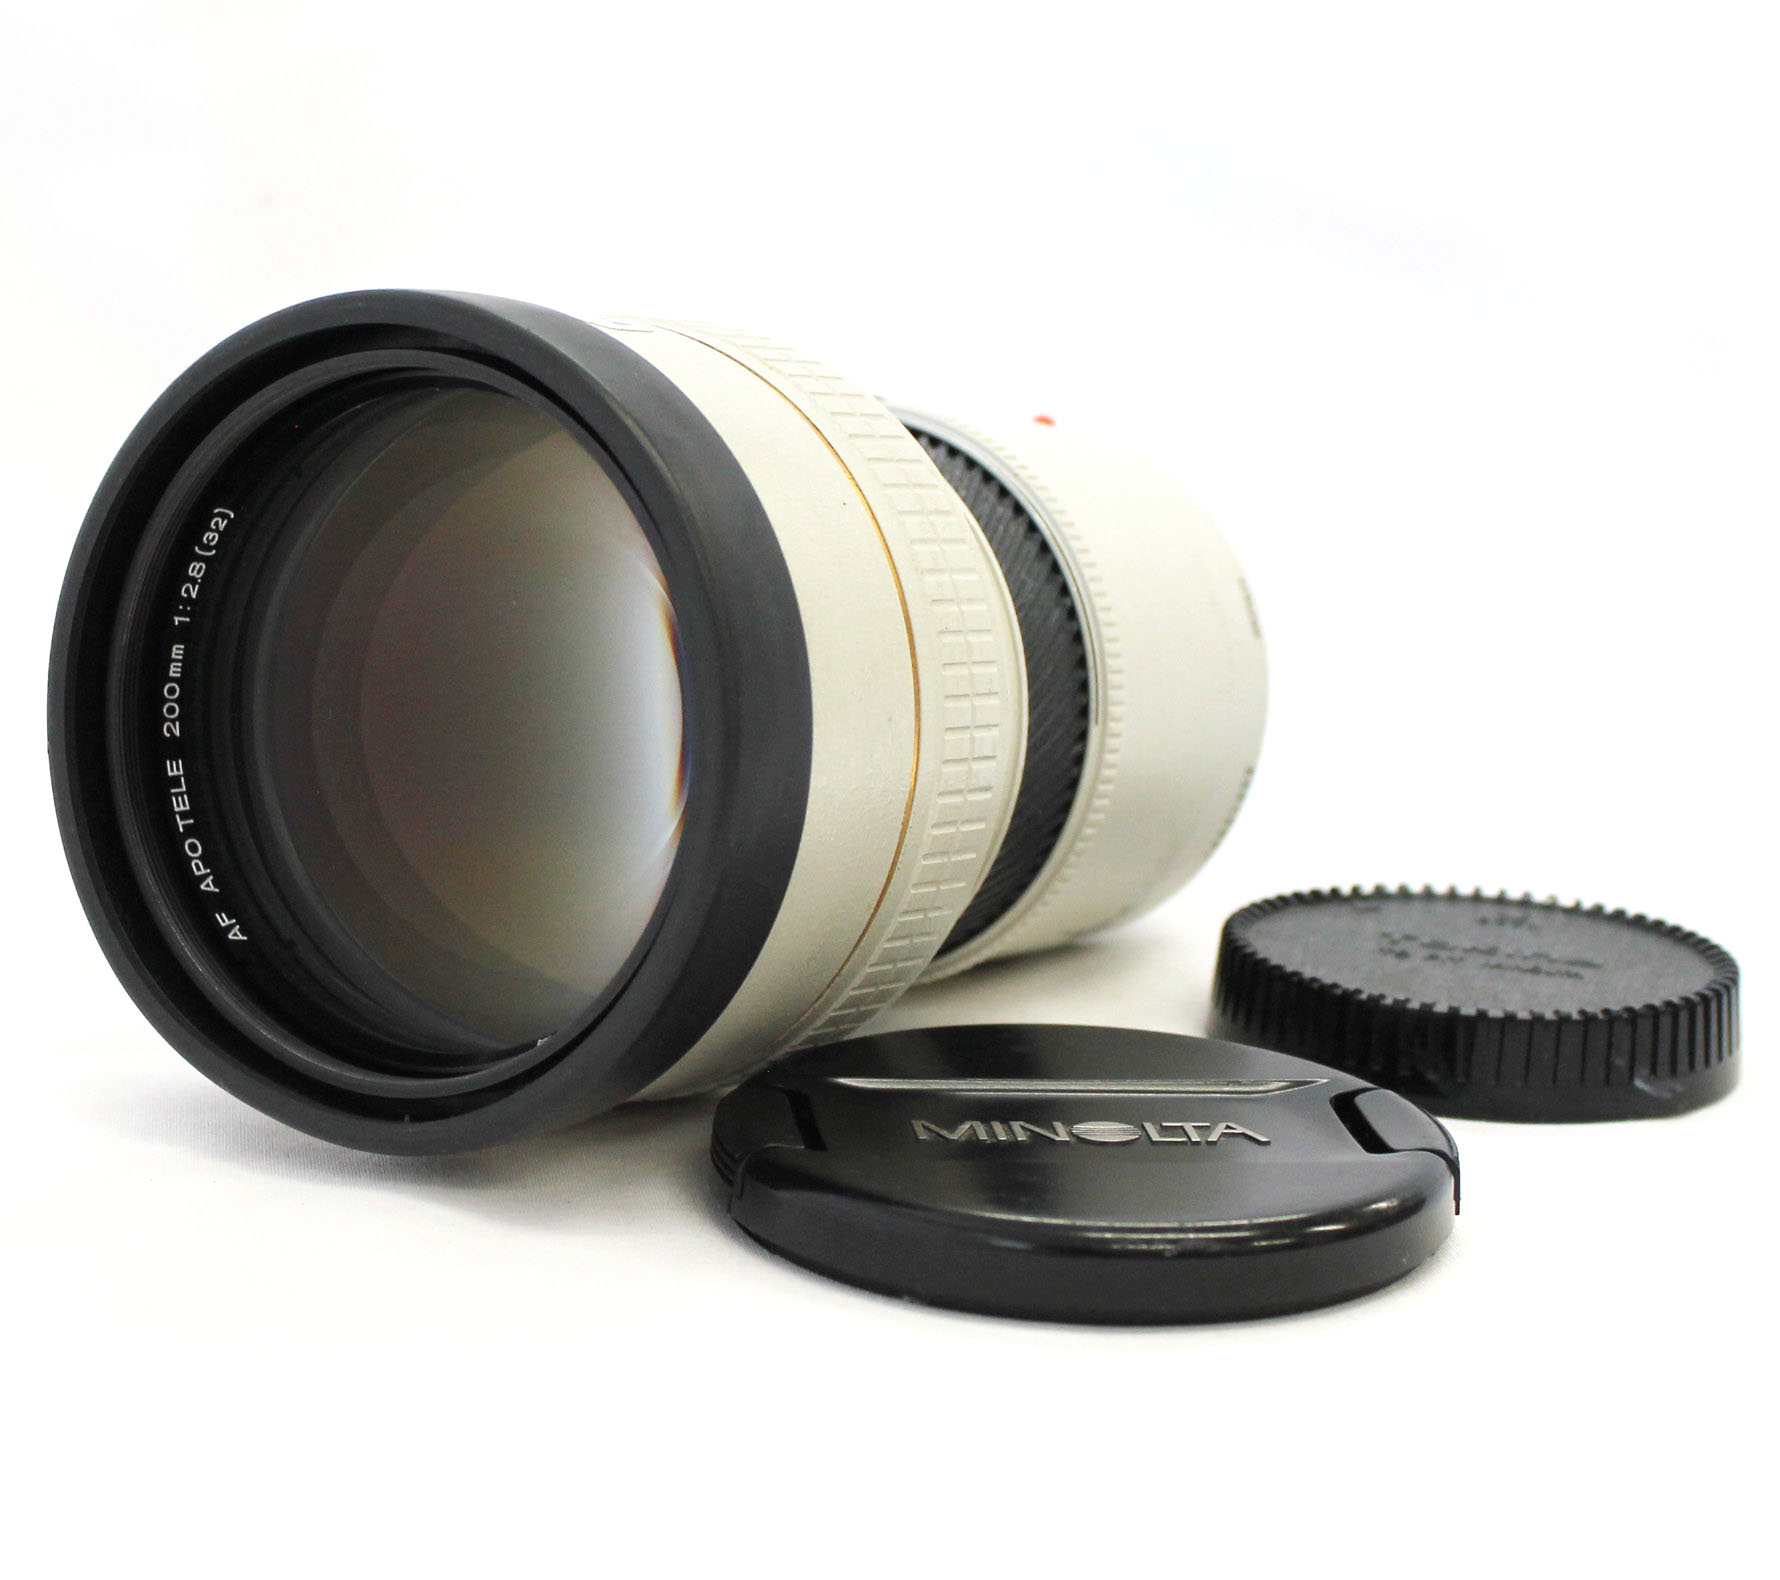 Minolta High Speed AF APO TELE 200mm F/2.8 Lens for Minolta / Sony A mount from Japan